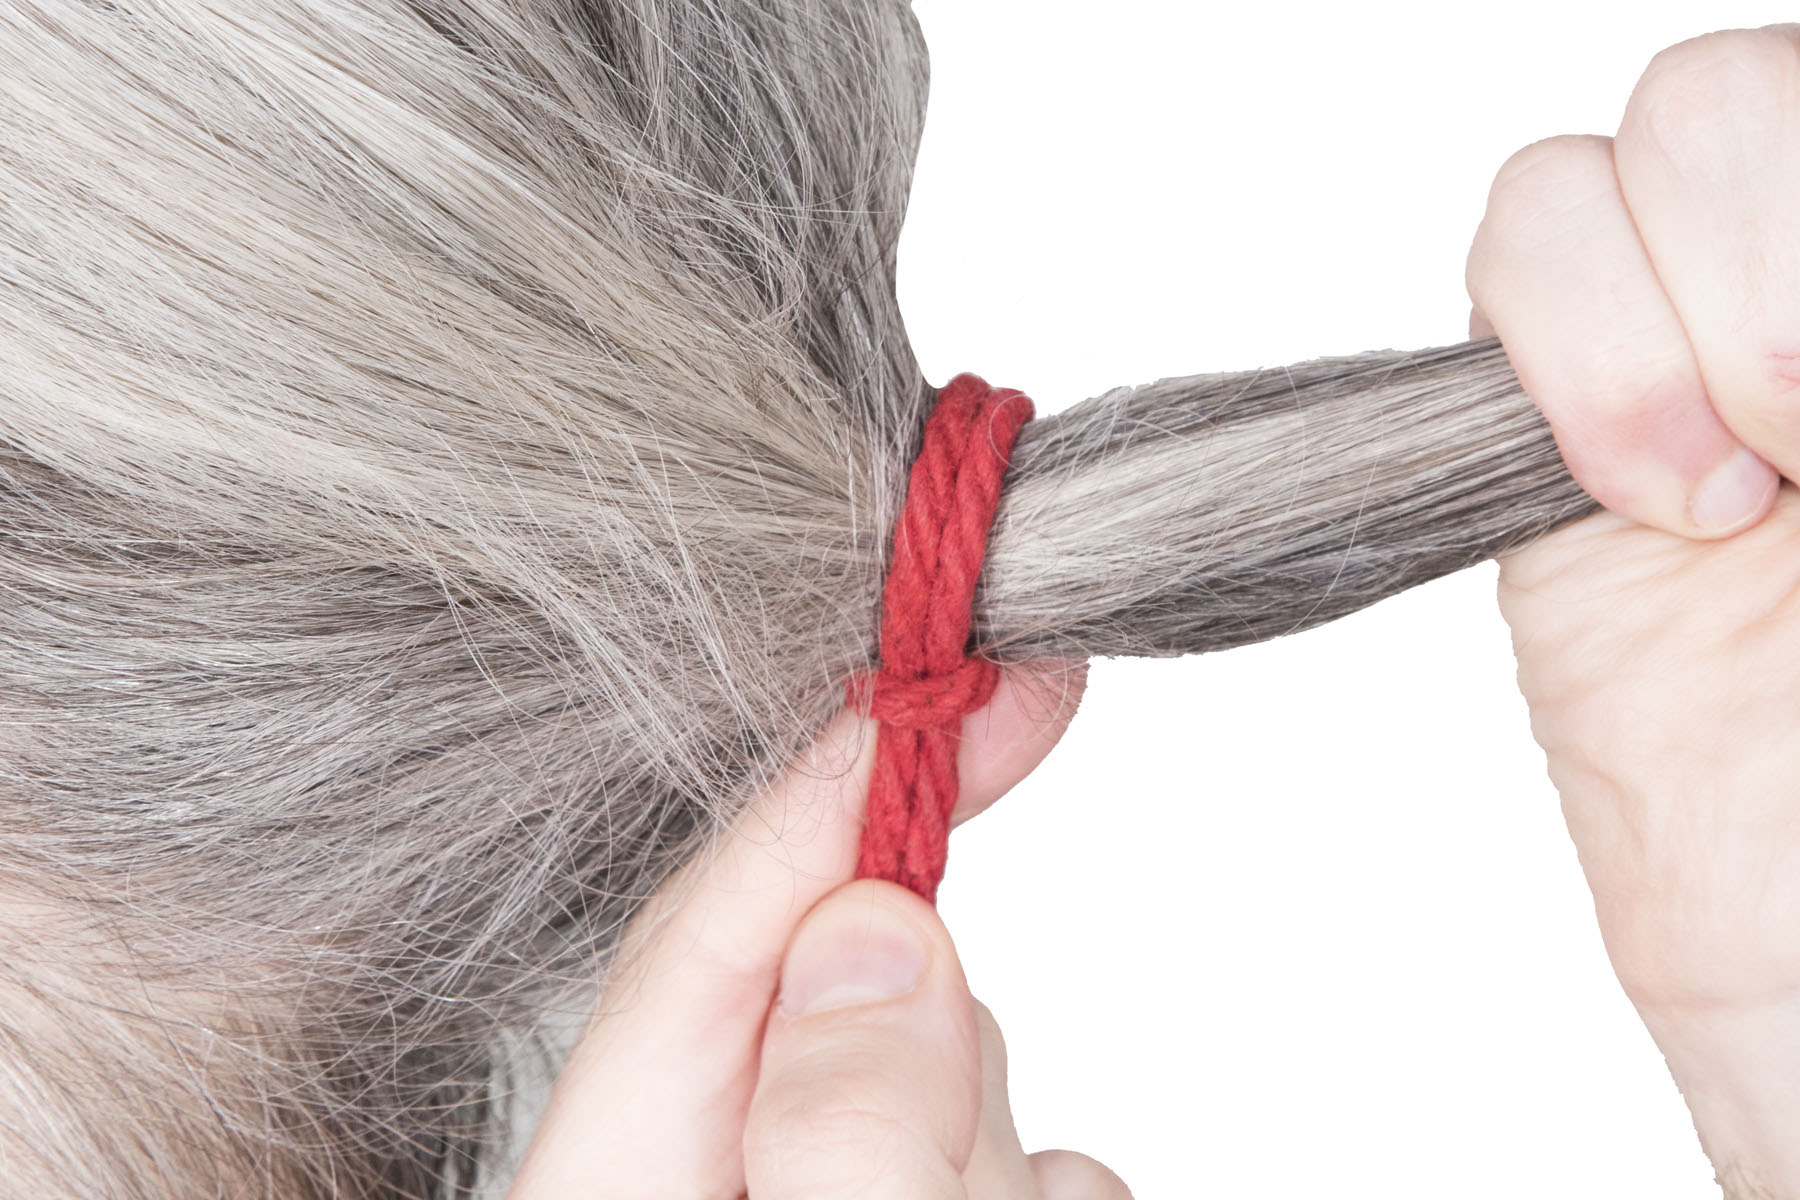 A closeup of a head with long graying hair. The rigger’s right hand is pulling the hair back into a ponytail. The rigger’s left hand has slipped the lark’s head off their wrist and slid it onto the ponytail, right up to the scalp.